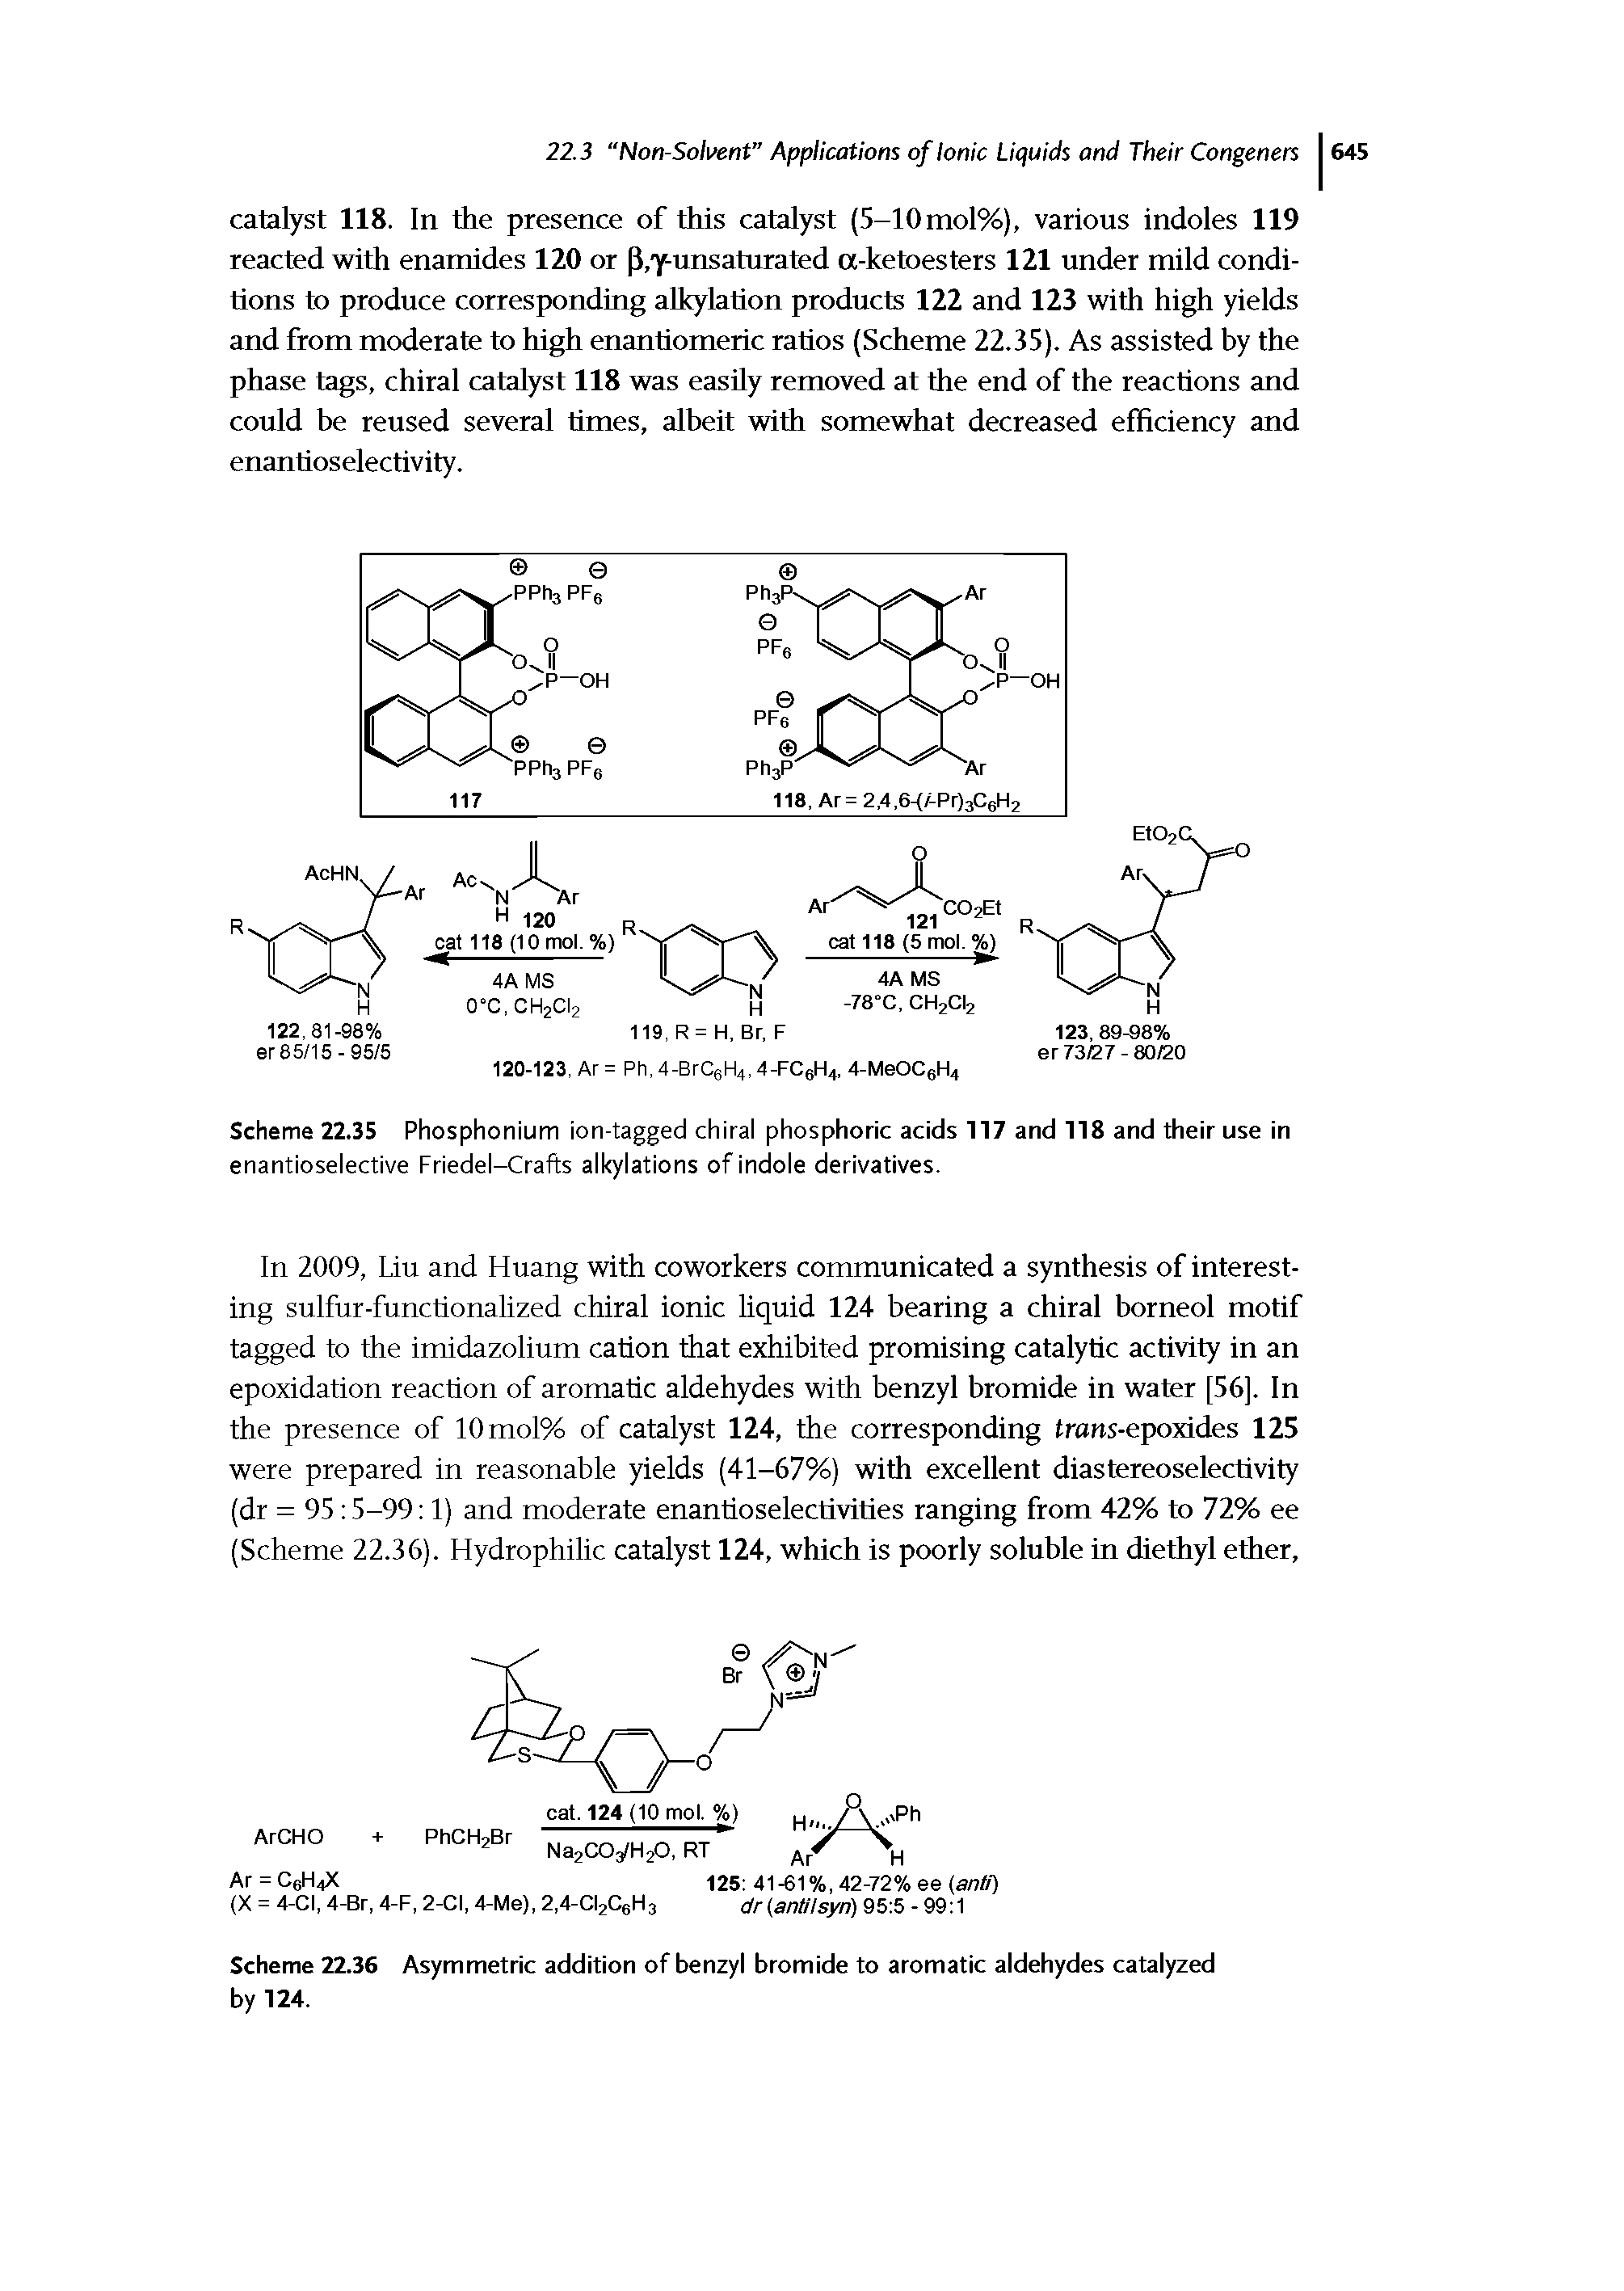 Scheme 22.35 Phosphonium ion-tagged chiral phosphoric acids 117 and 118 and their use in enantioselective Friedel-Crafts alkylations of indole derivatives.